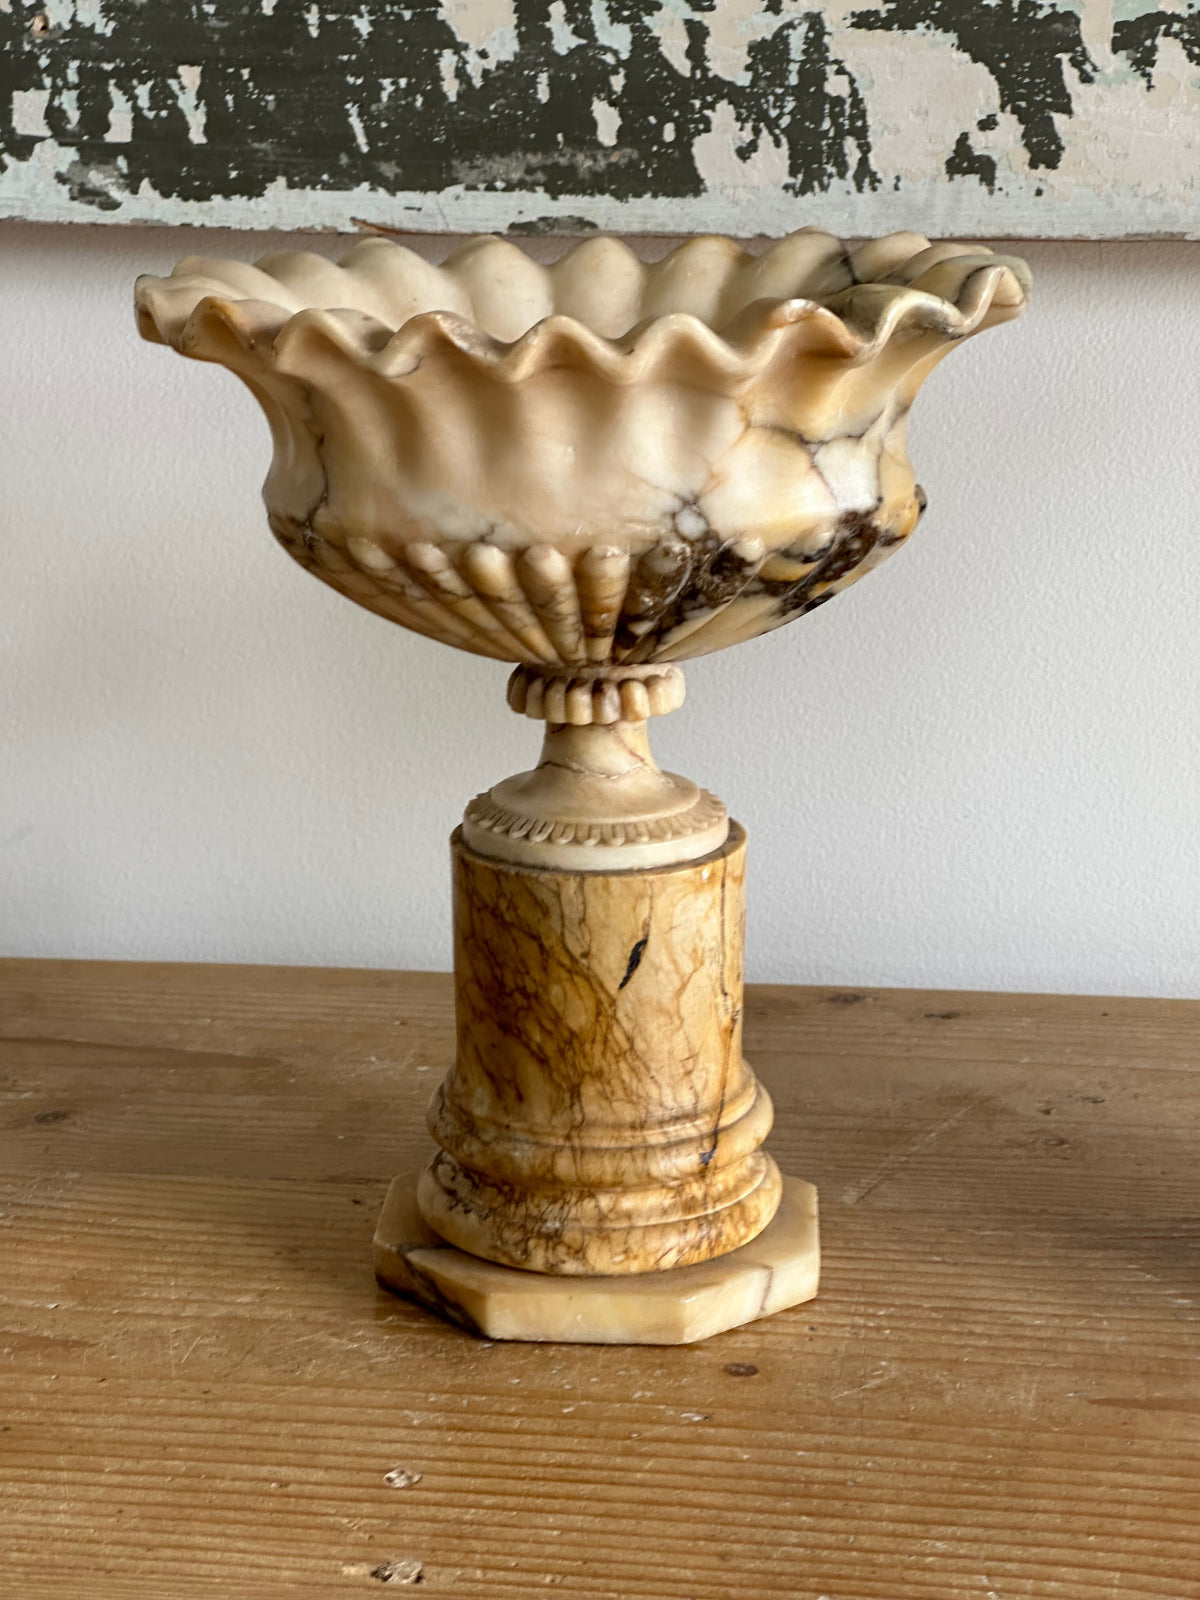 Oval Scalloped Marble Pedestal Urns, Grand Tour